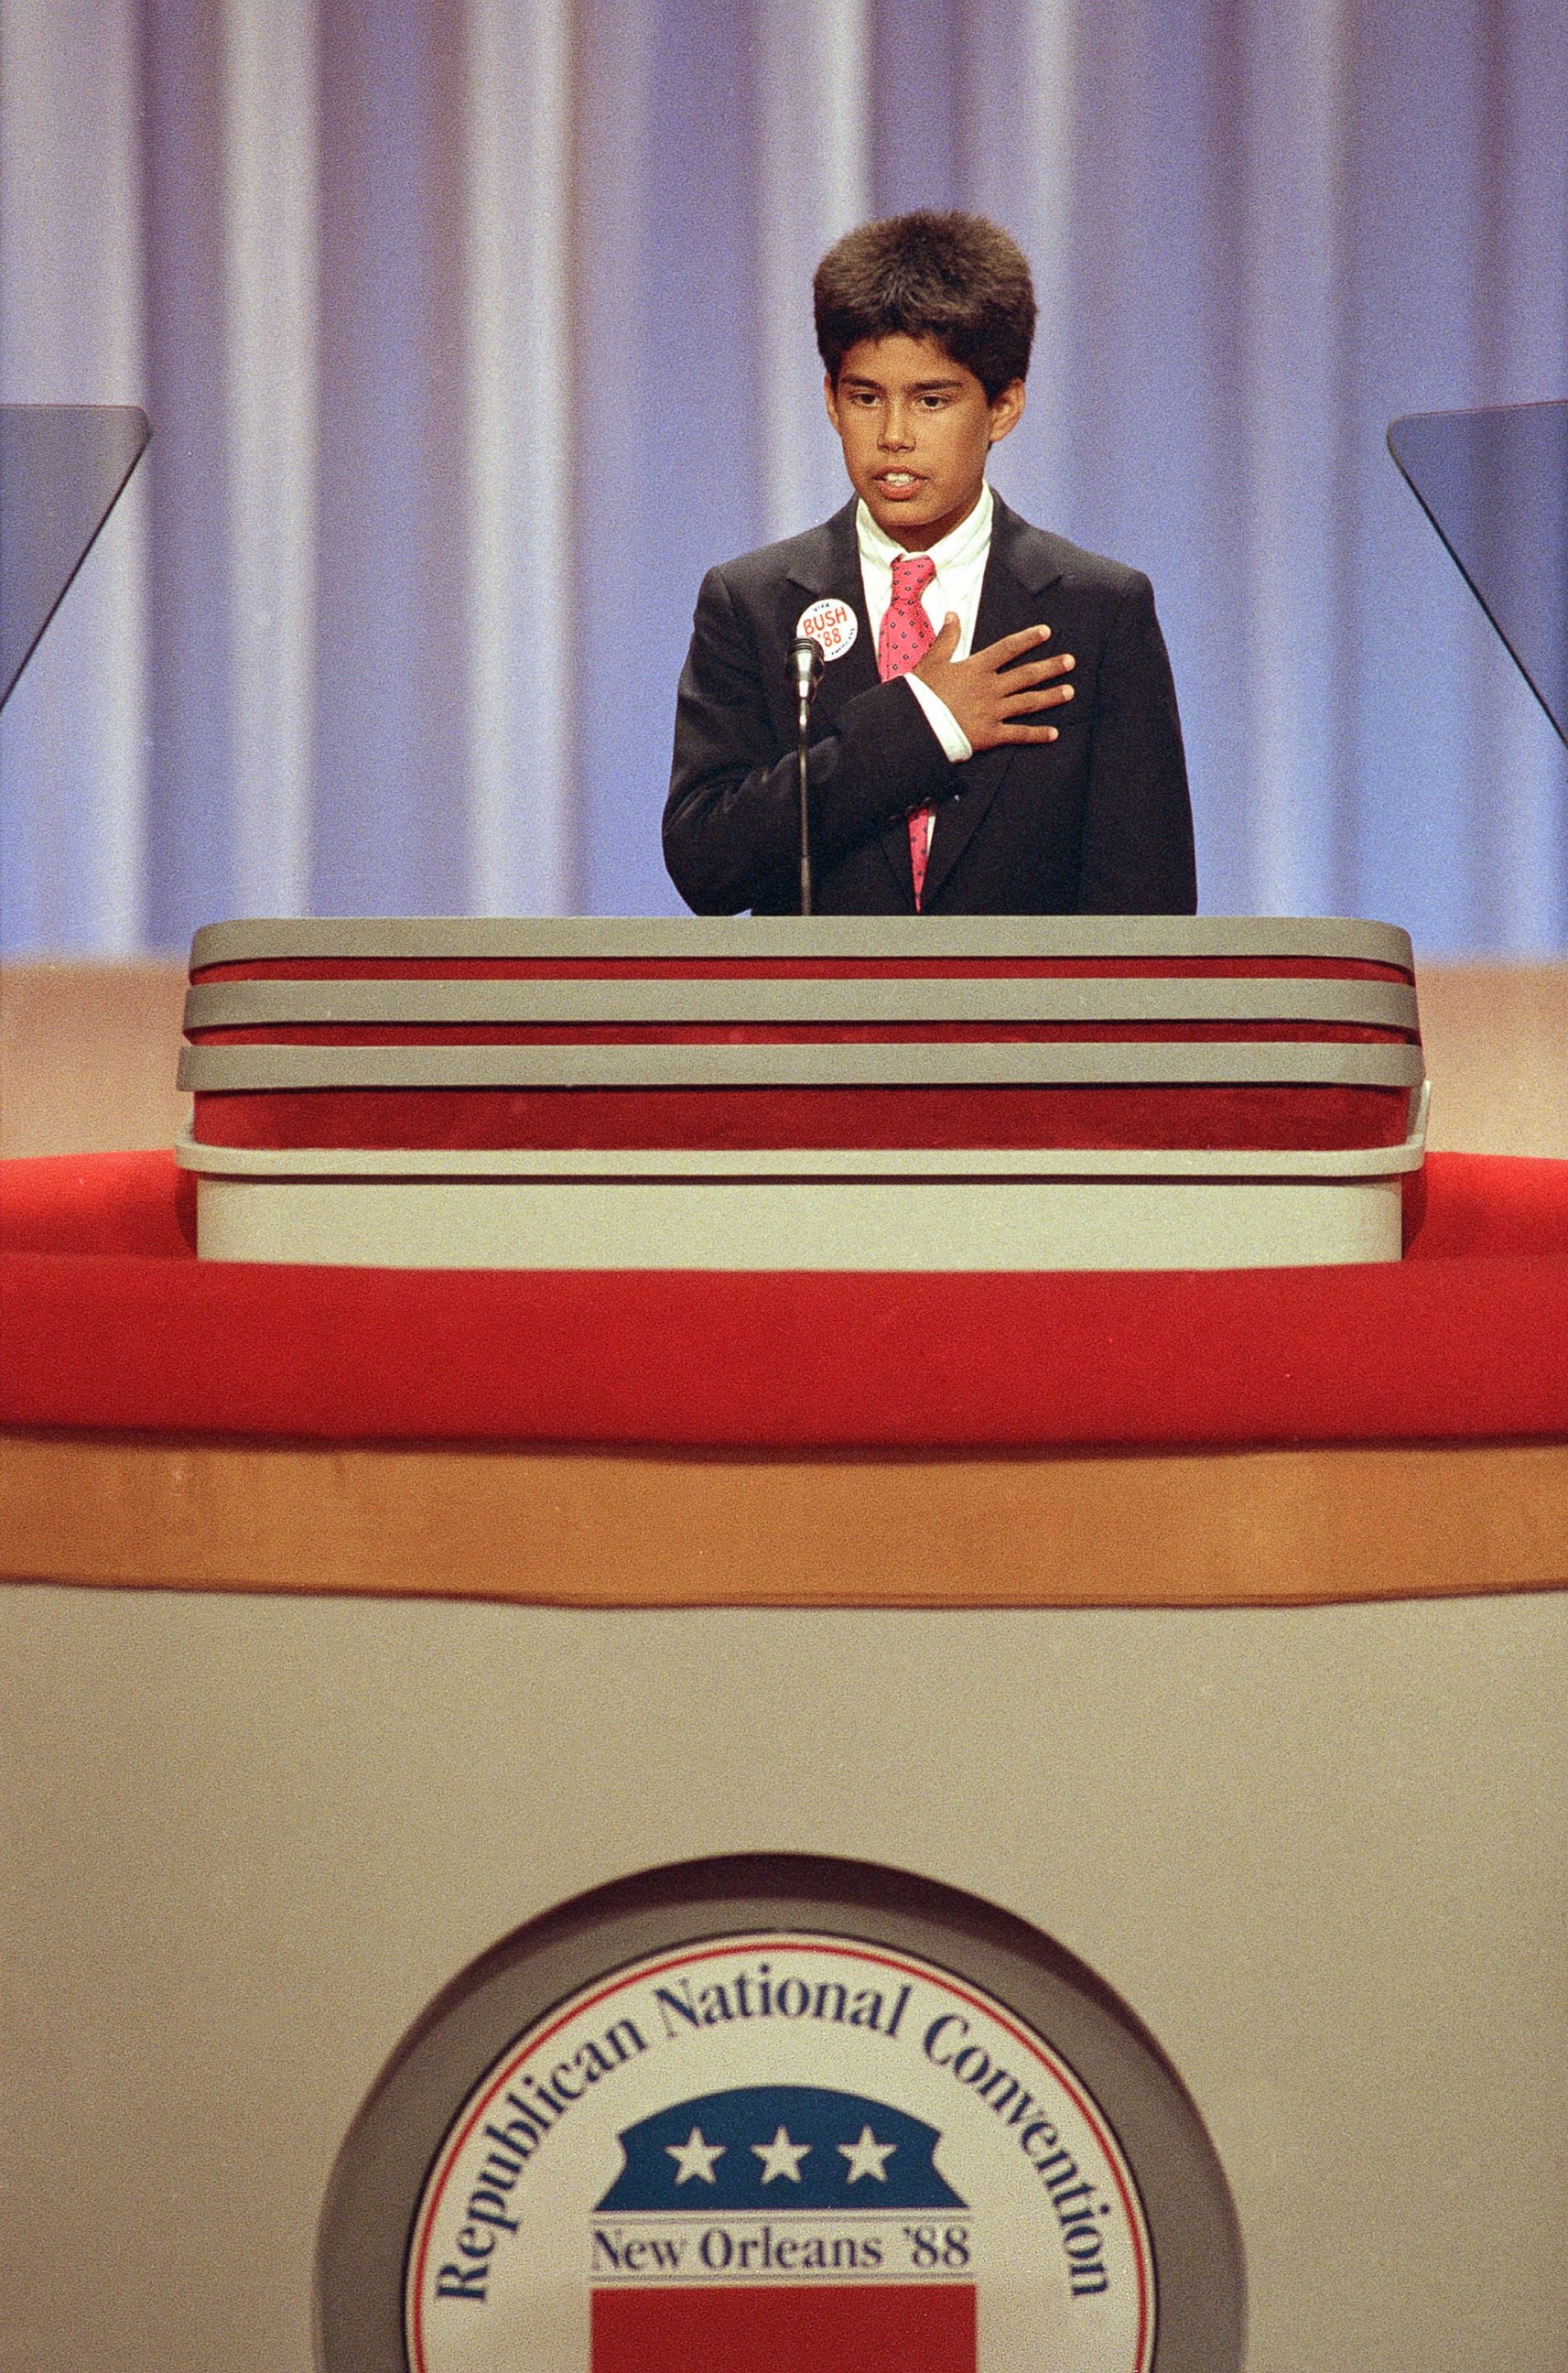 PHOTO: George P. Bush, grandson of George H.W. Bush, leads the Pledge of Allegiance at the opening session of the Republican National Convention in New Orleans, La. on Aug. 16, 1988. 